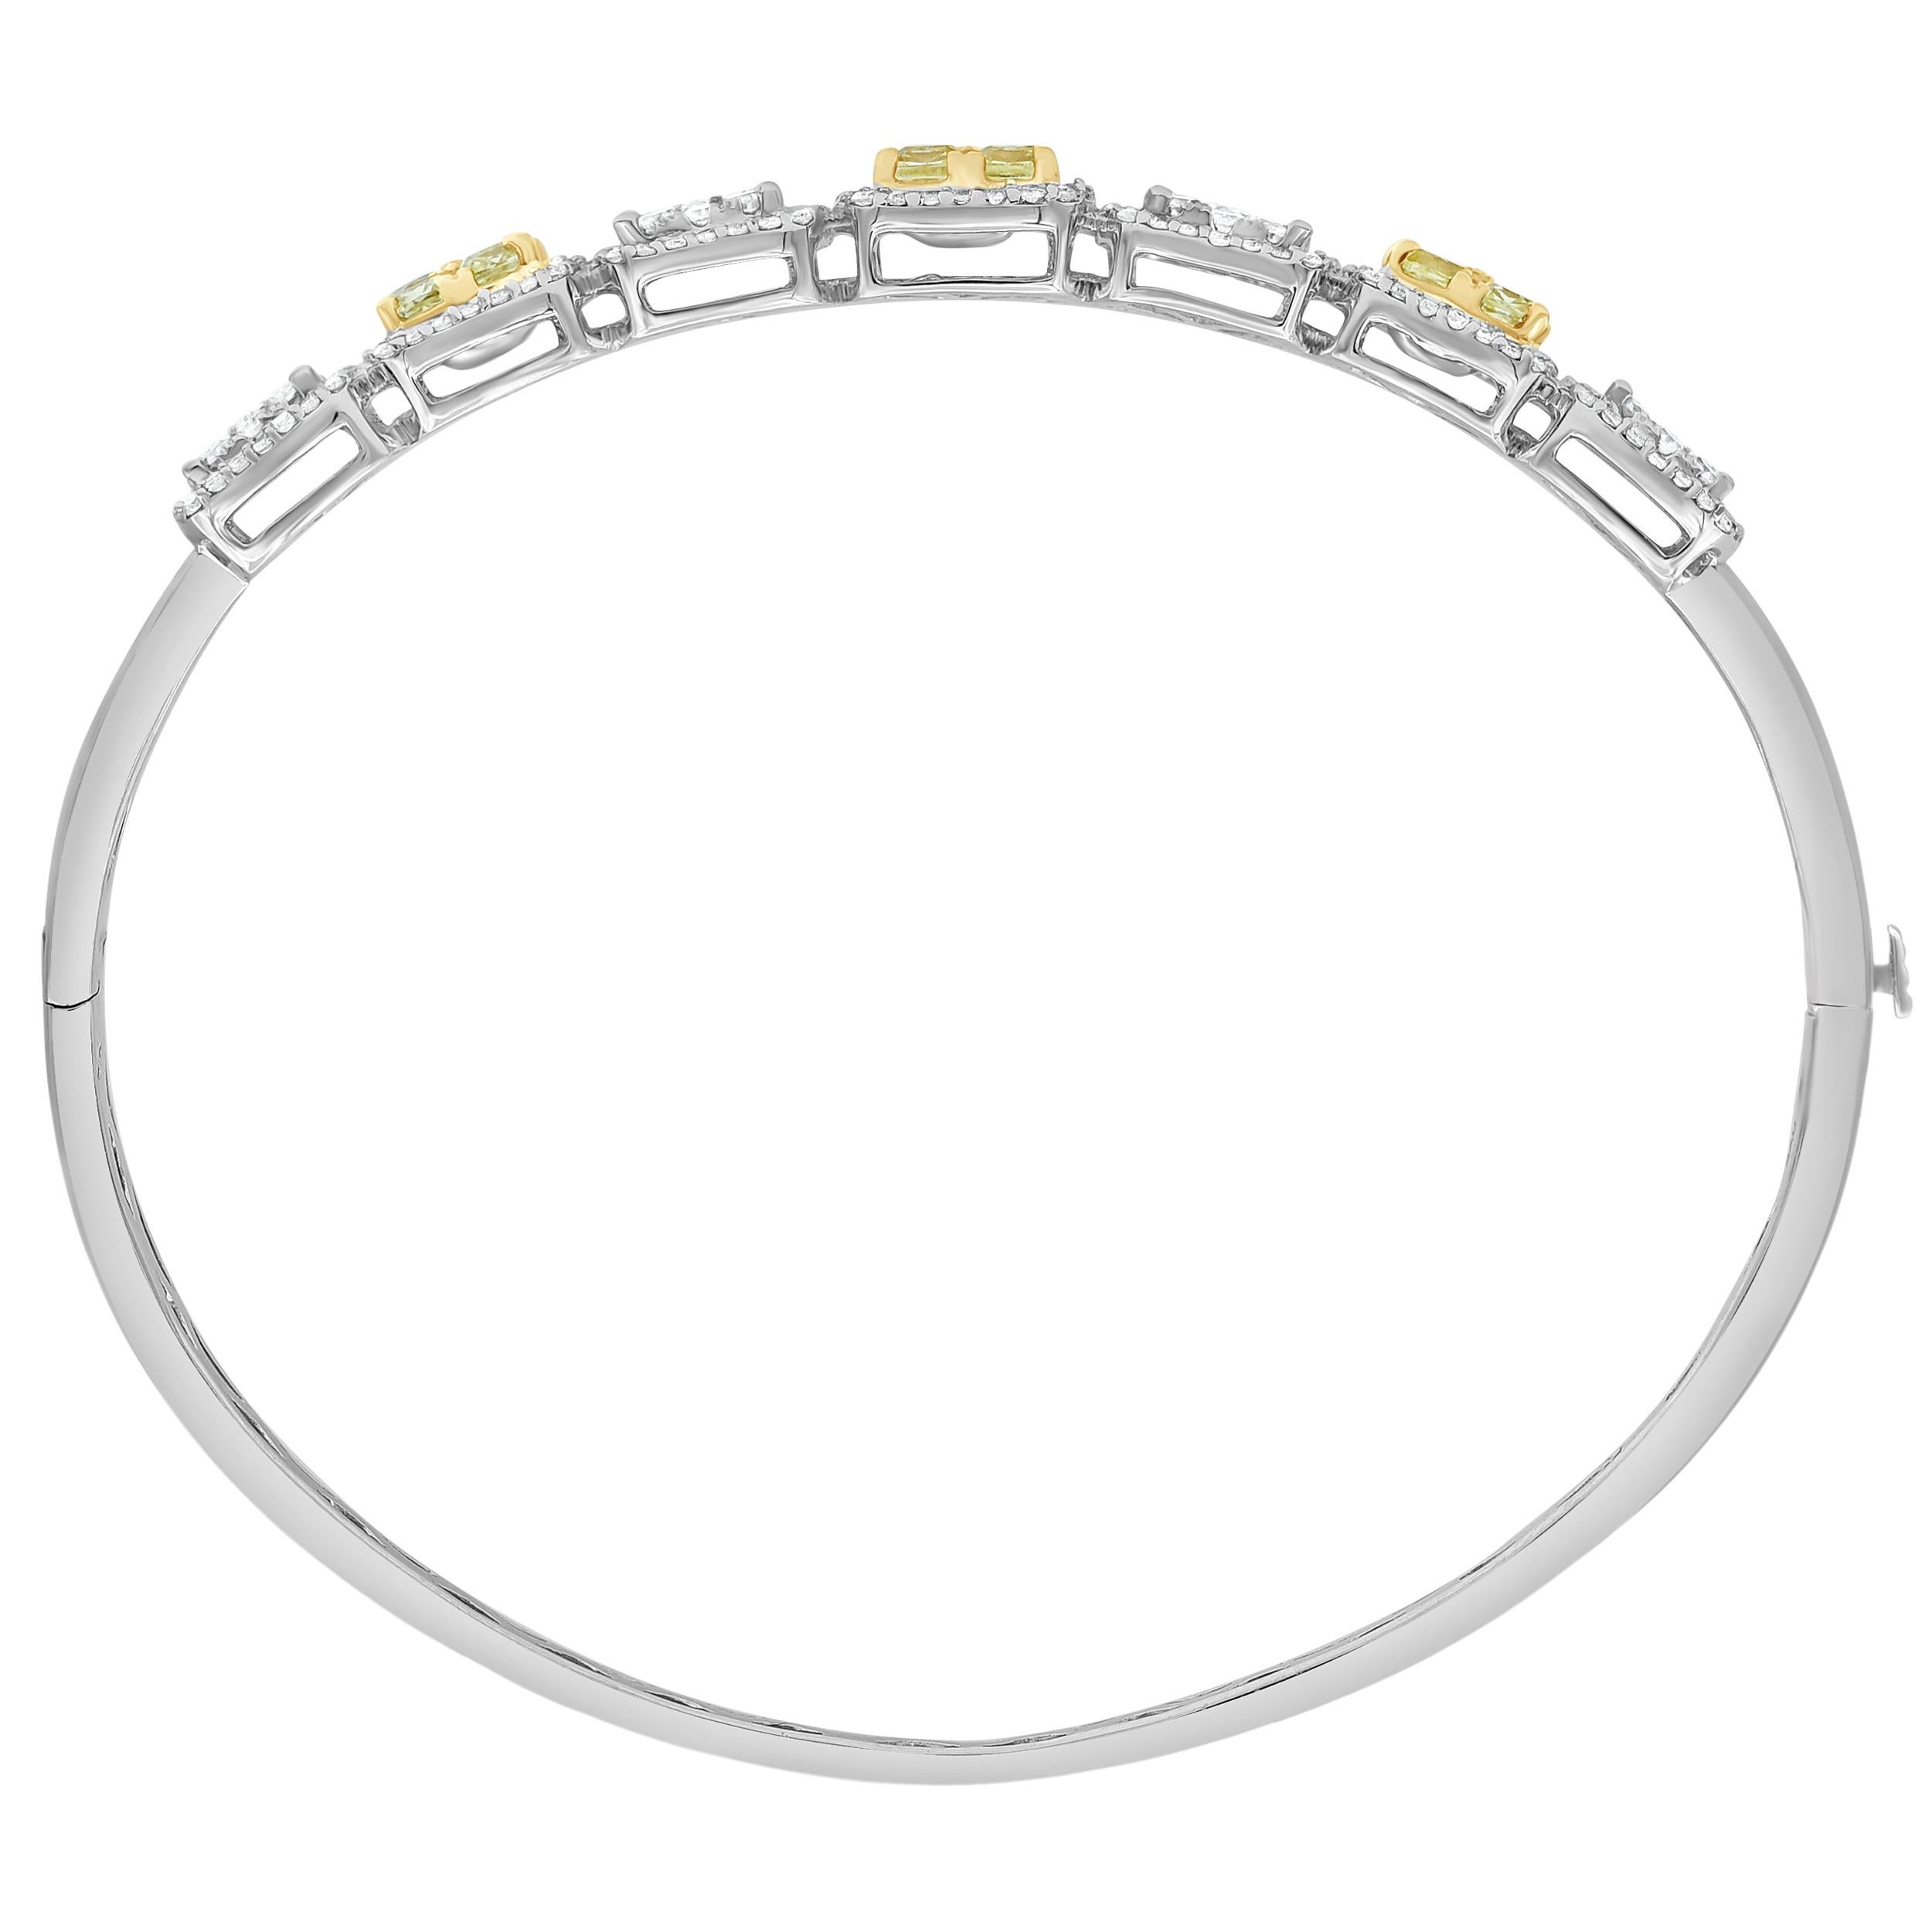 Wrap your wrist in this spectacular diamond bangle bracelet. Crafted in cool 18K white gold, this design showcases paired Cushion-cut diamonds Color IS Treated Yellow & Clarity is SI1-SI2 wrapped in Square-shaped frames of round diamonds with Color